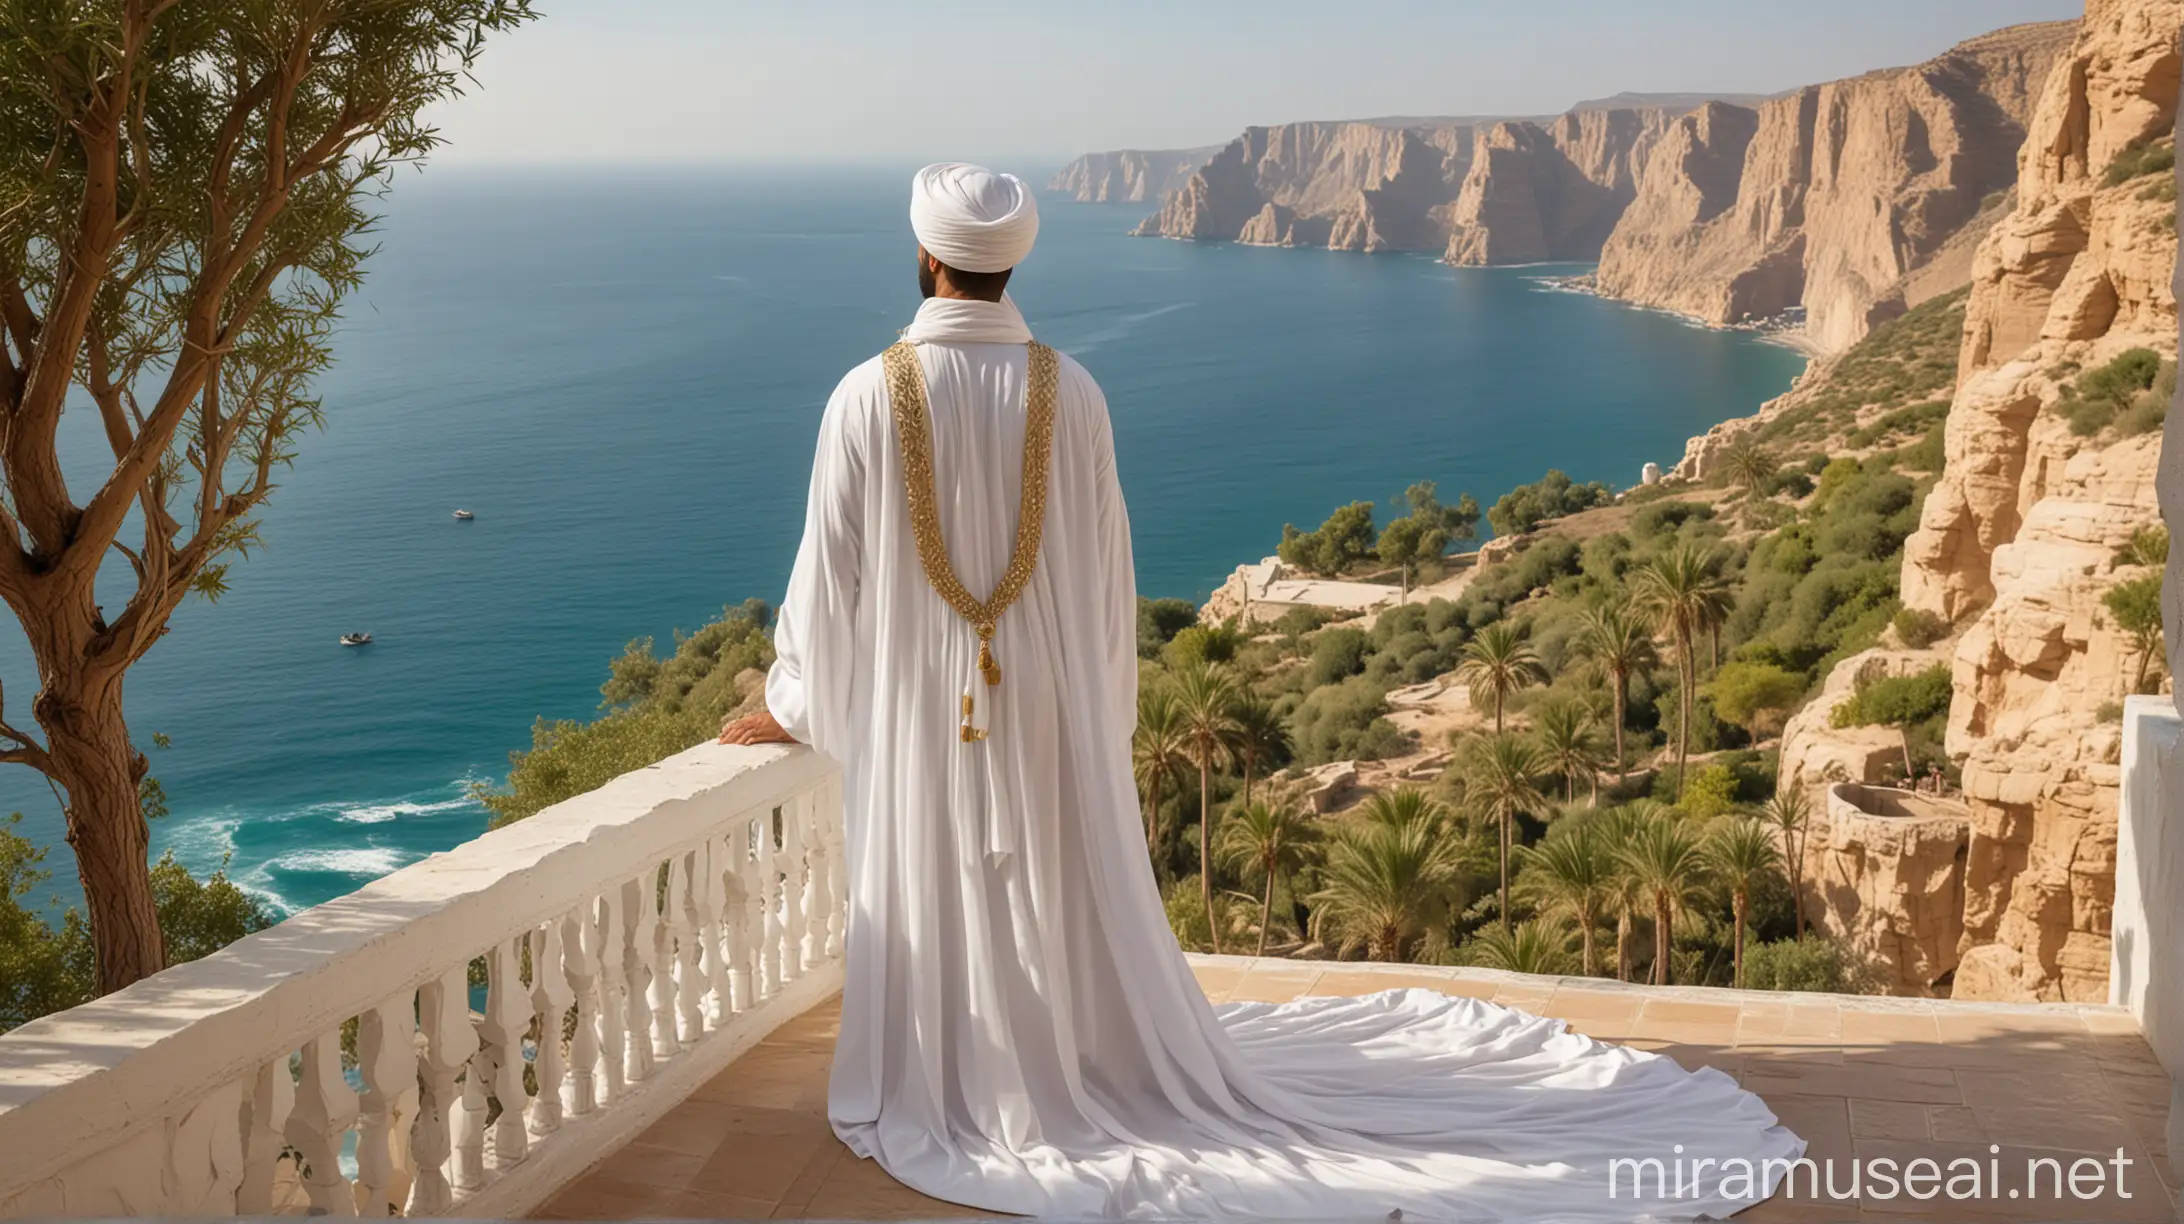 A man in an Arabian turban and long white Arabian gown, overlooking a stunning view of sea cliffs and trees, arranged like a painting.